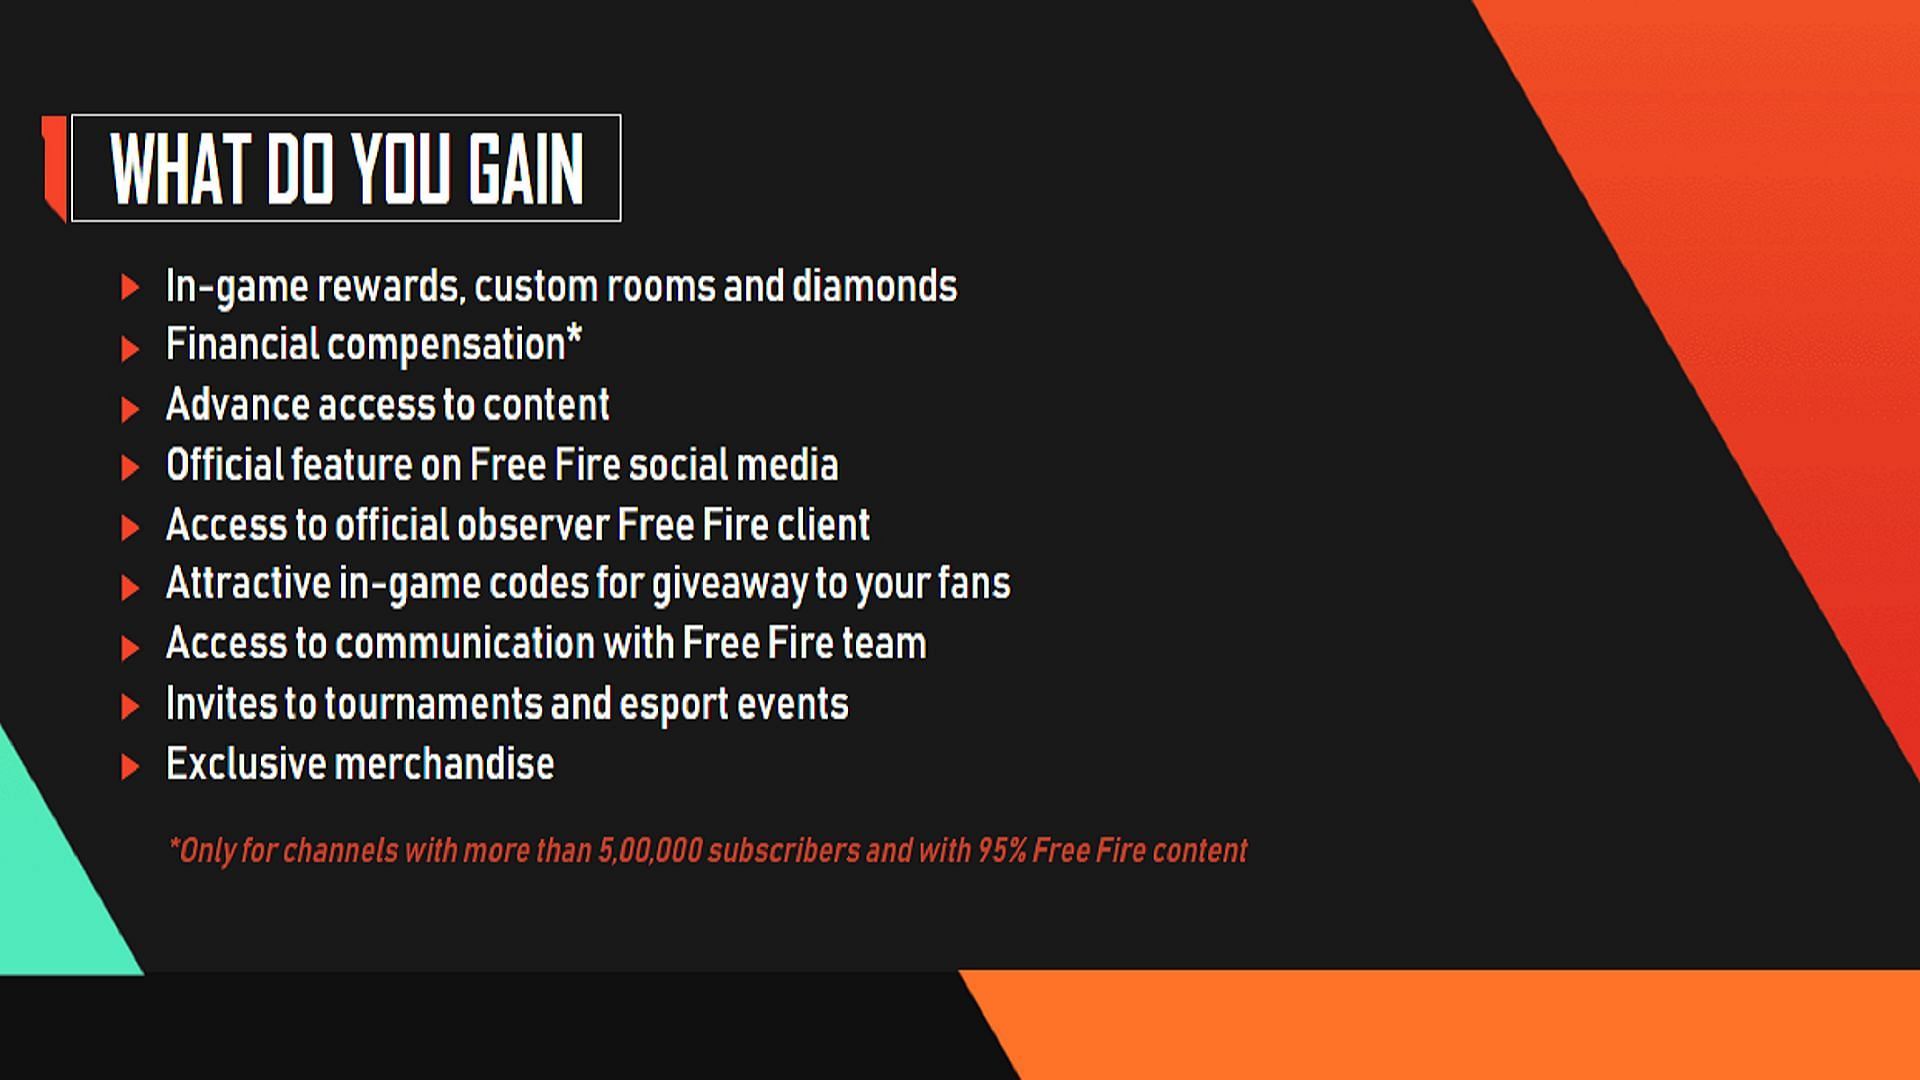 All these things have benefits (Image via Garena)